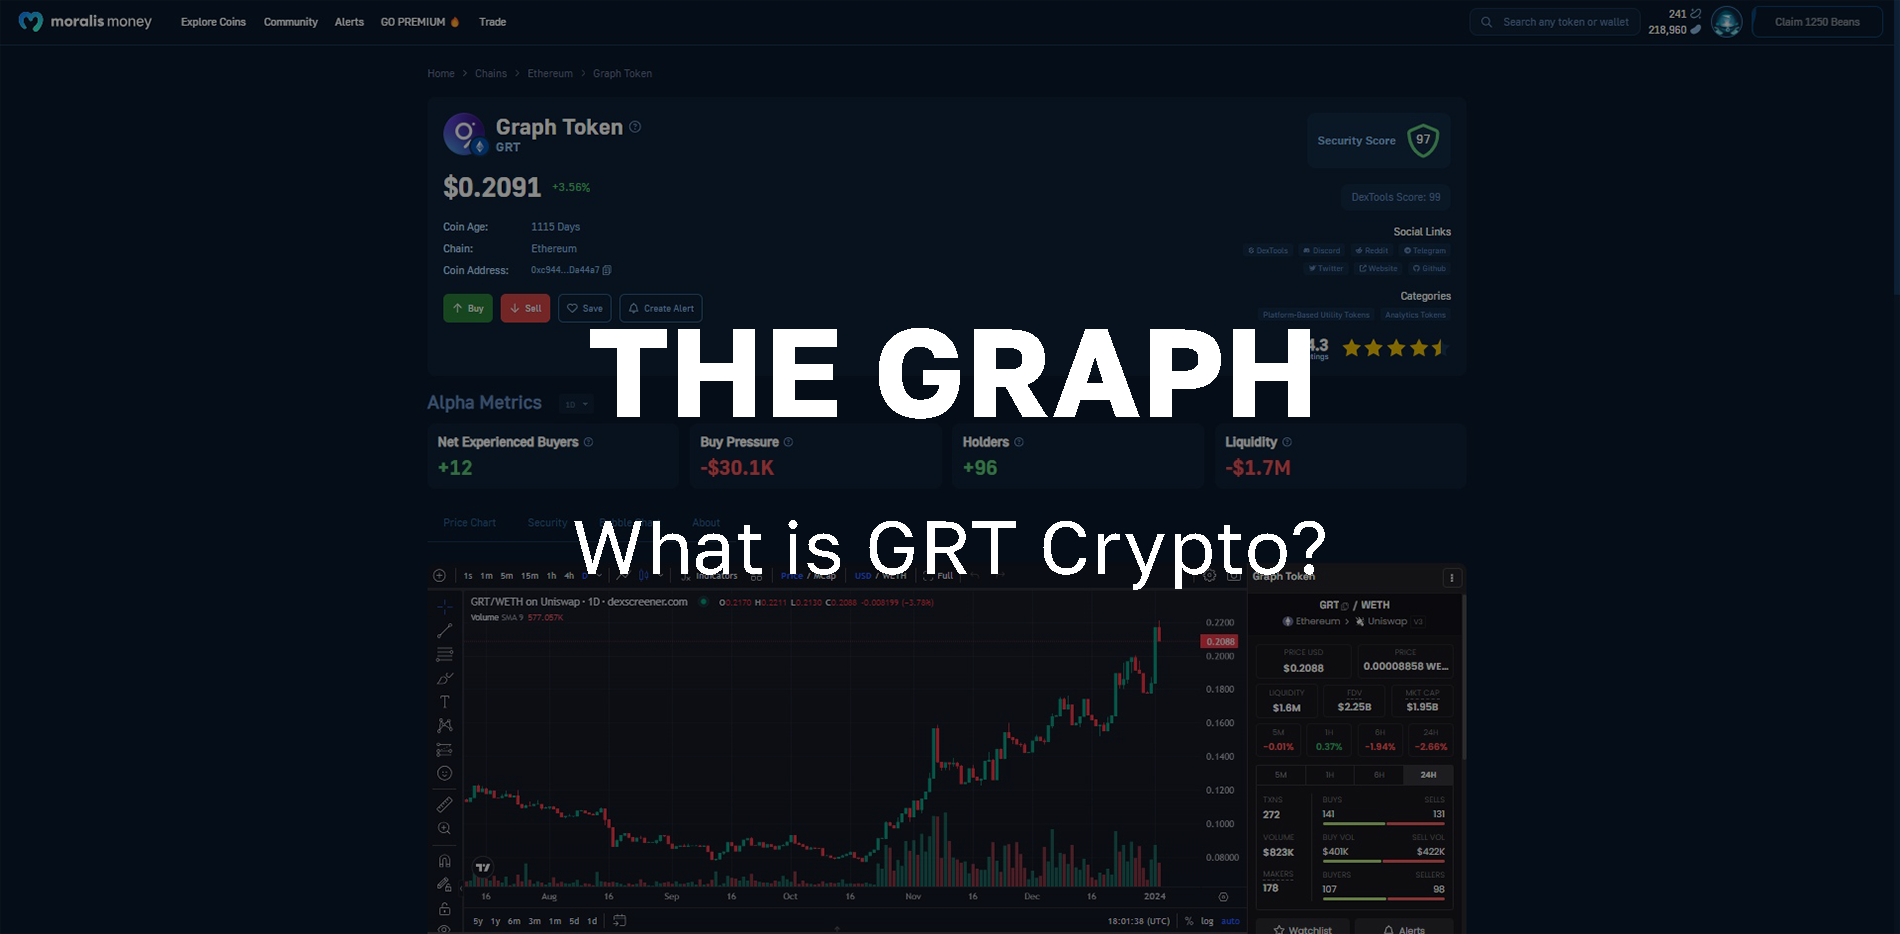 Graphic art illustrating with title - The Graph - What is GRT Crypto?